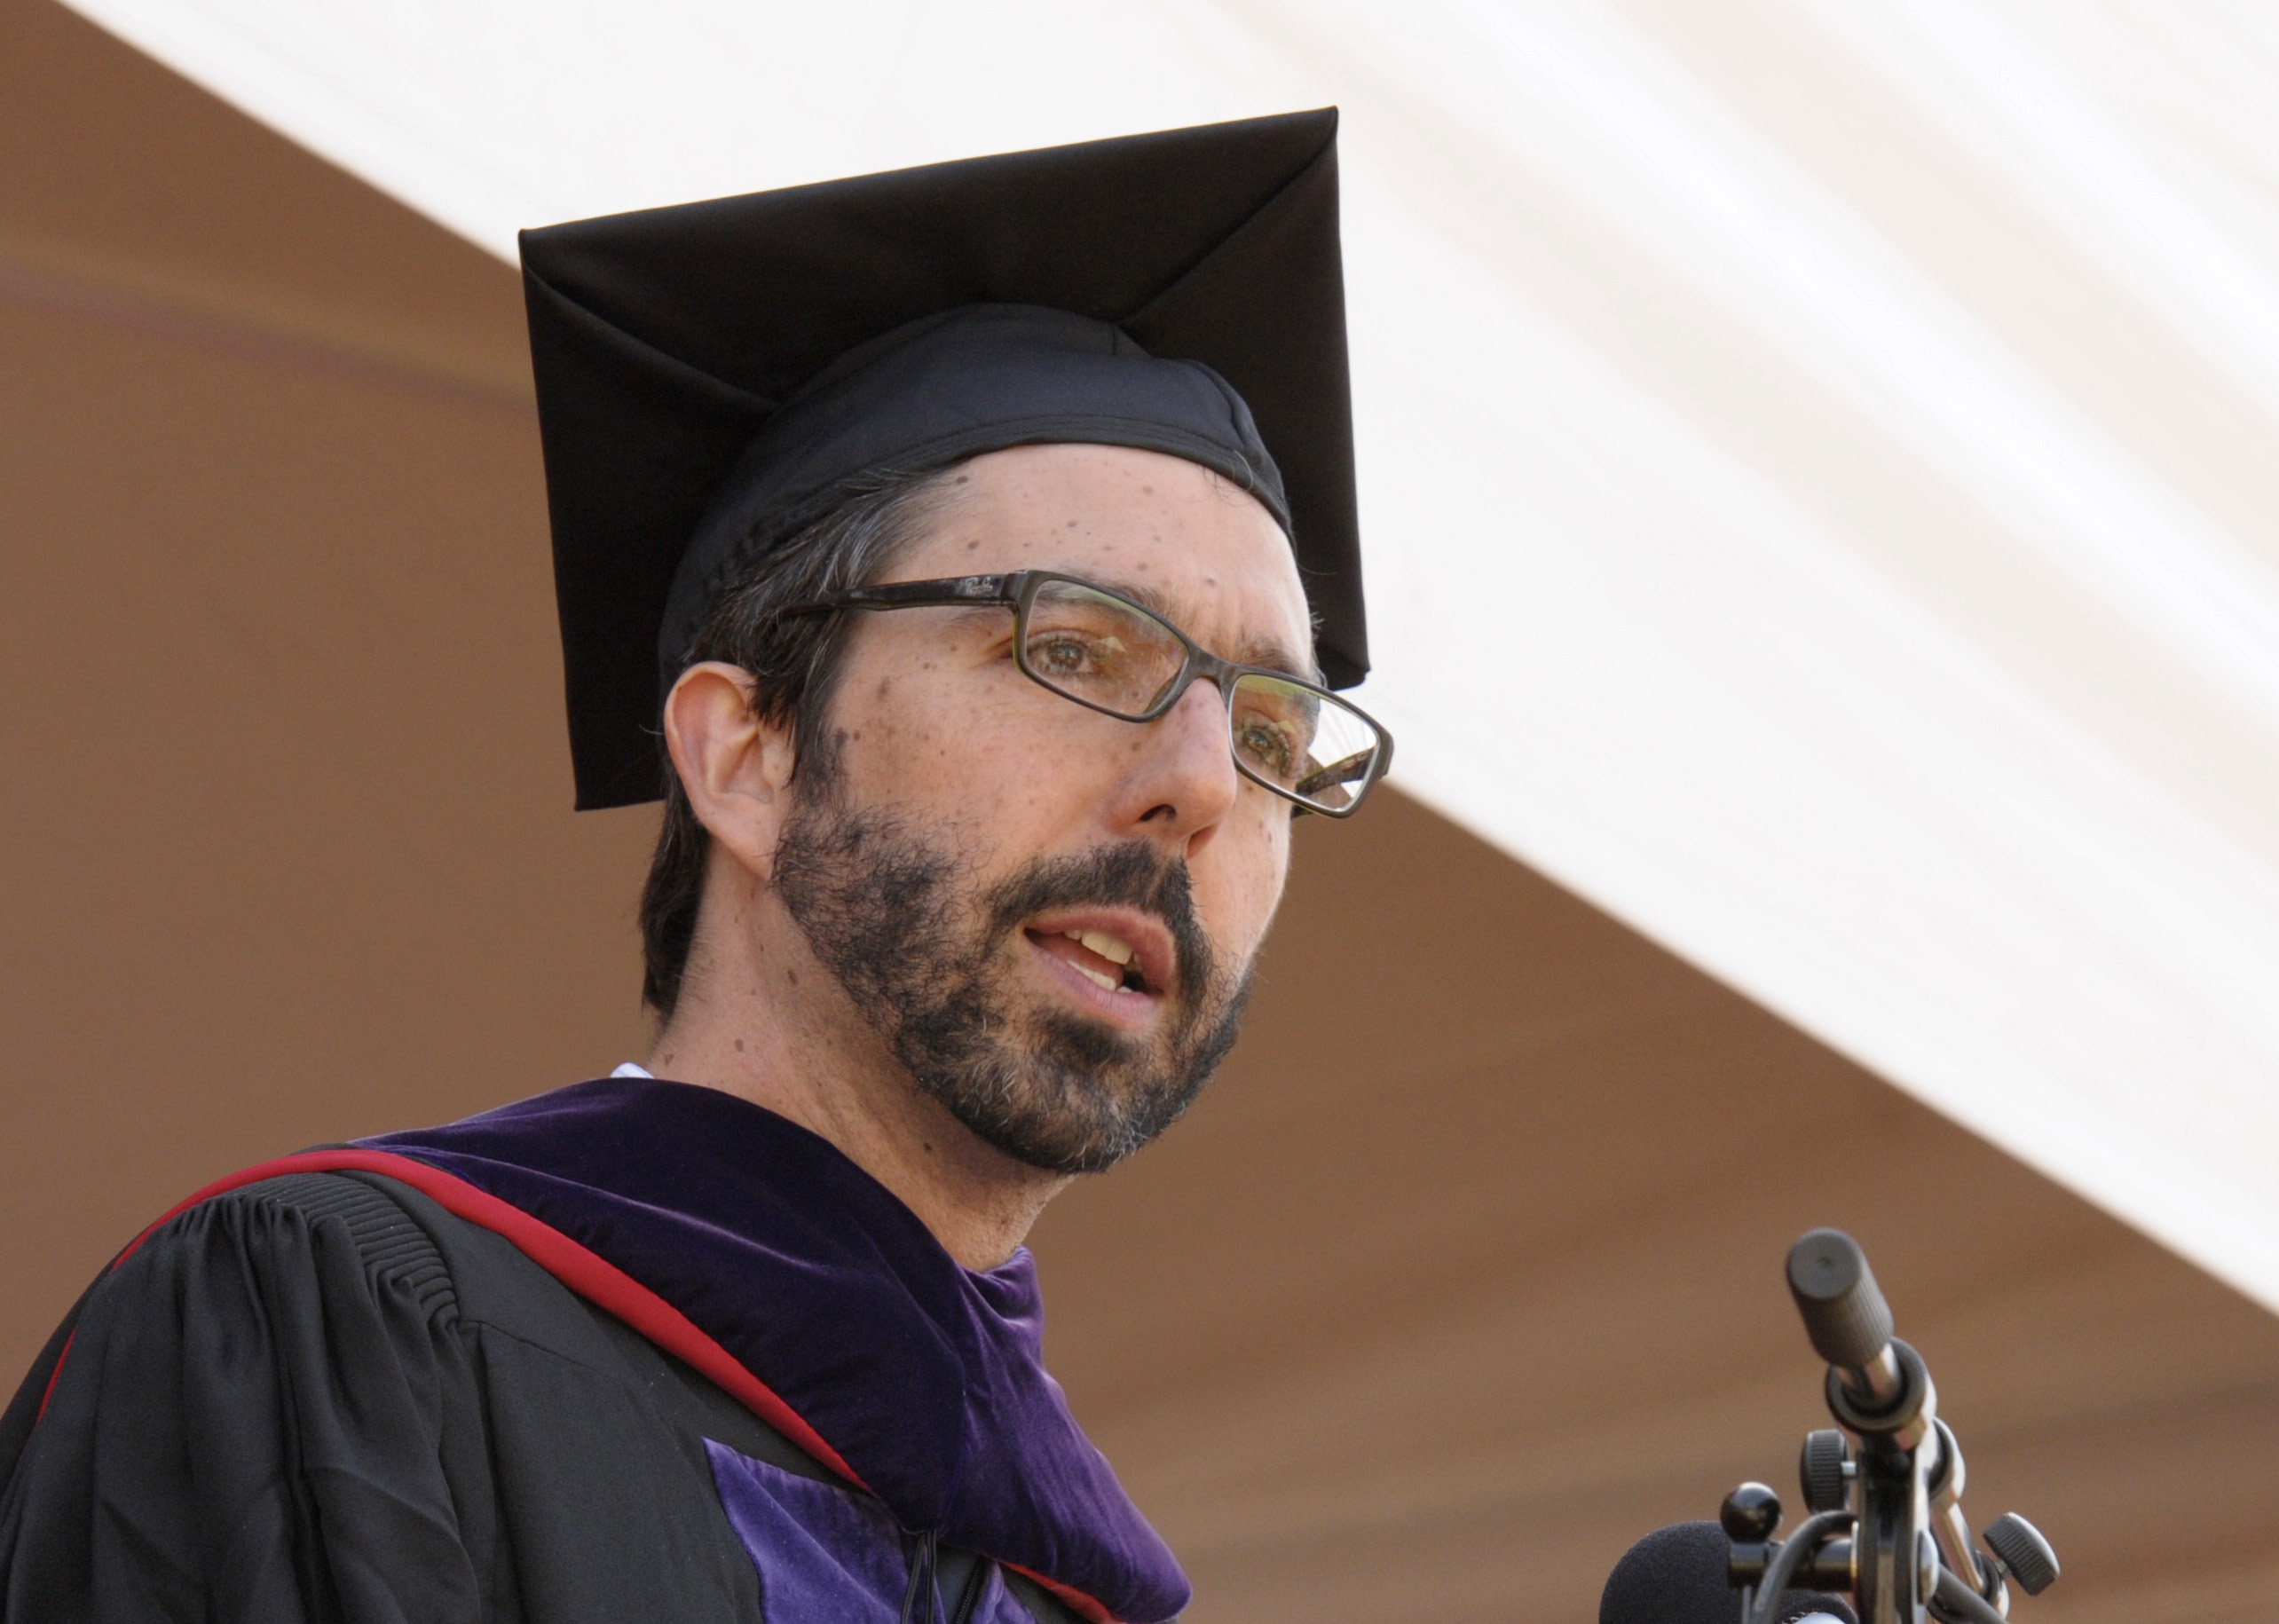 A person in graduation attire speaking into a microphone. image link to story